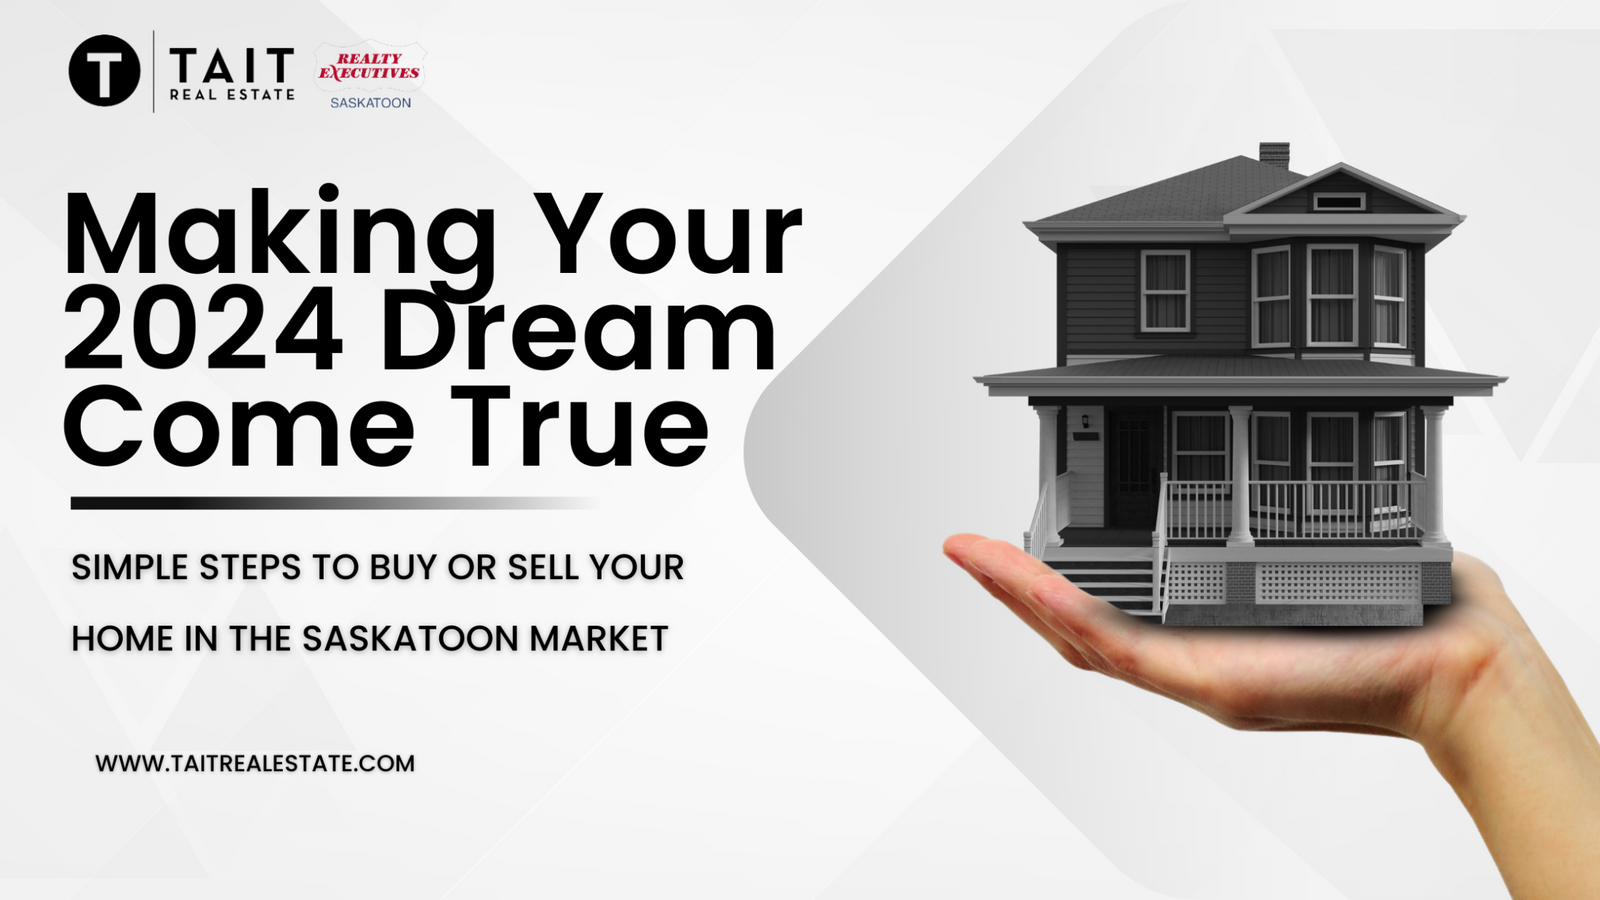 Making Your 2024 Dream Come True: Simple Steps to Buy or Sell Your Home in the Saskatoon Market